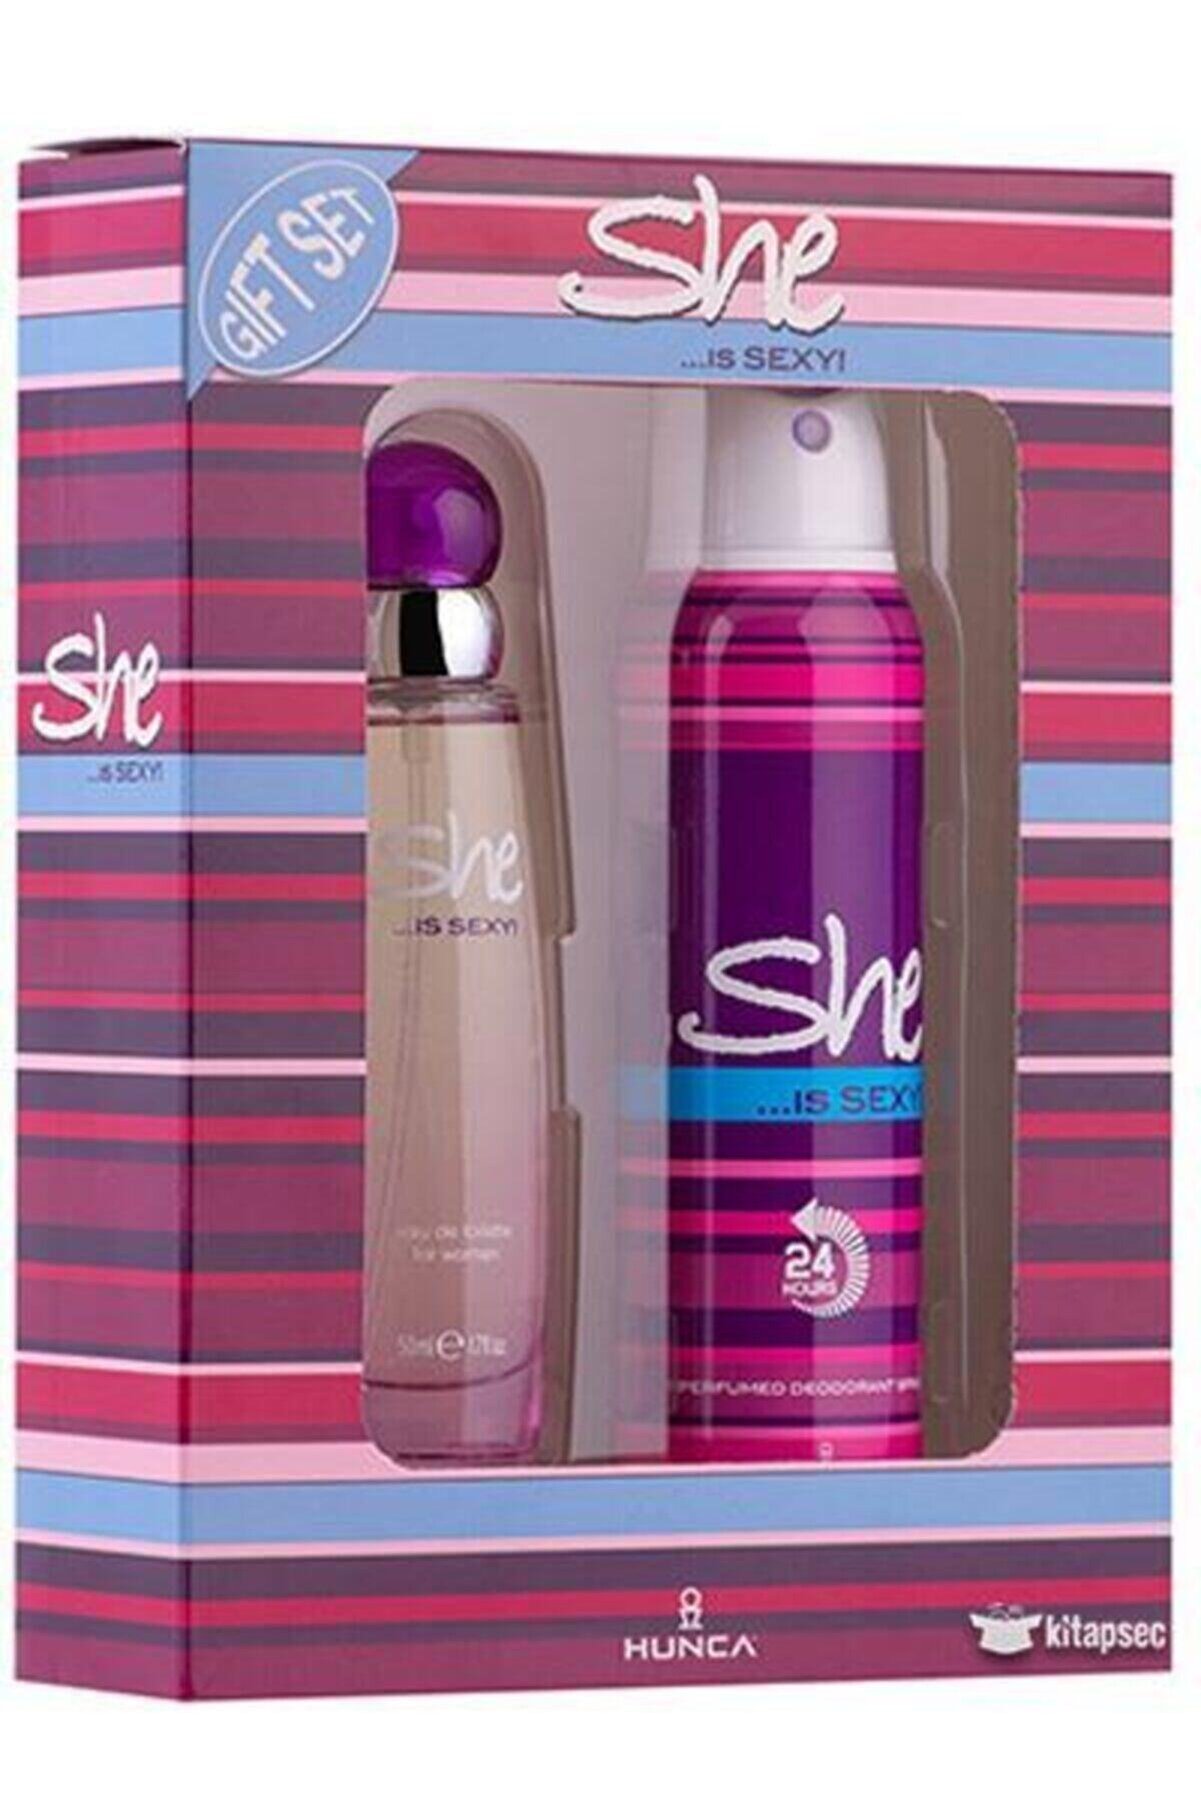 She Women Set Sexy Edt+ Deo